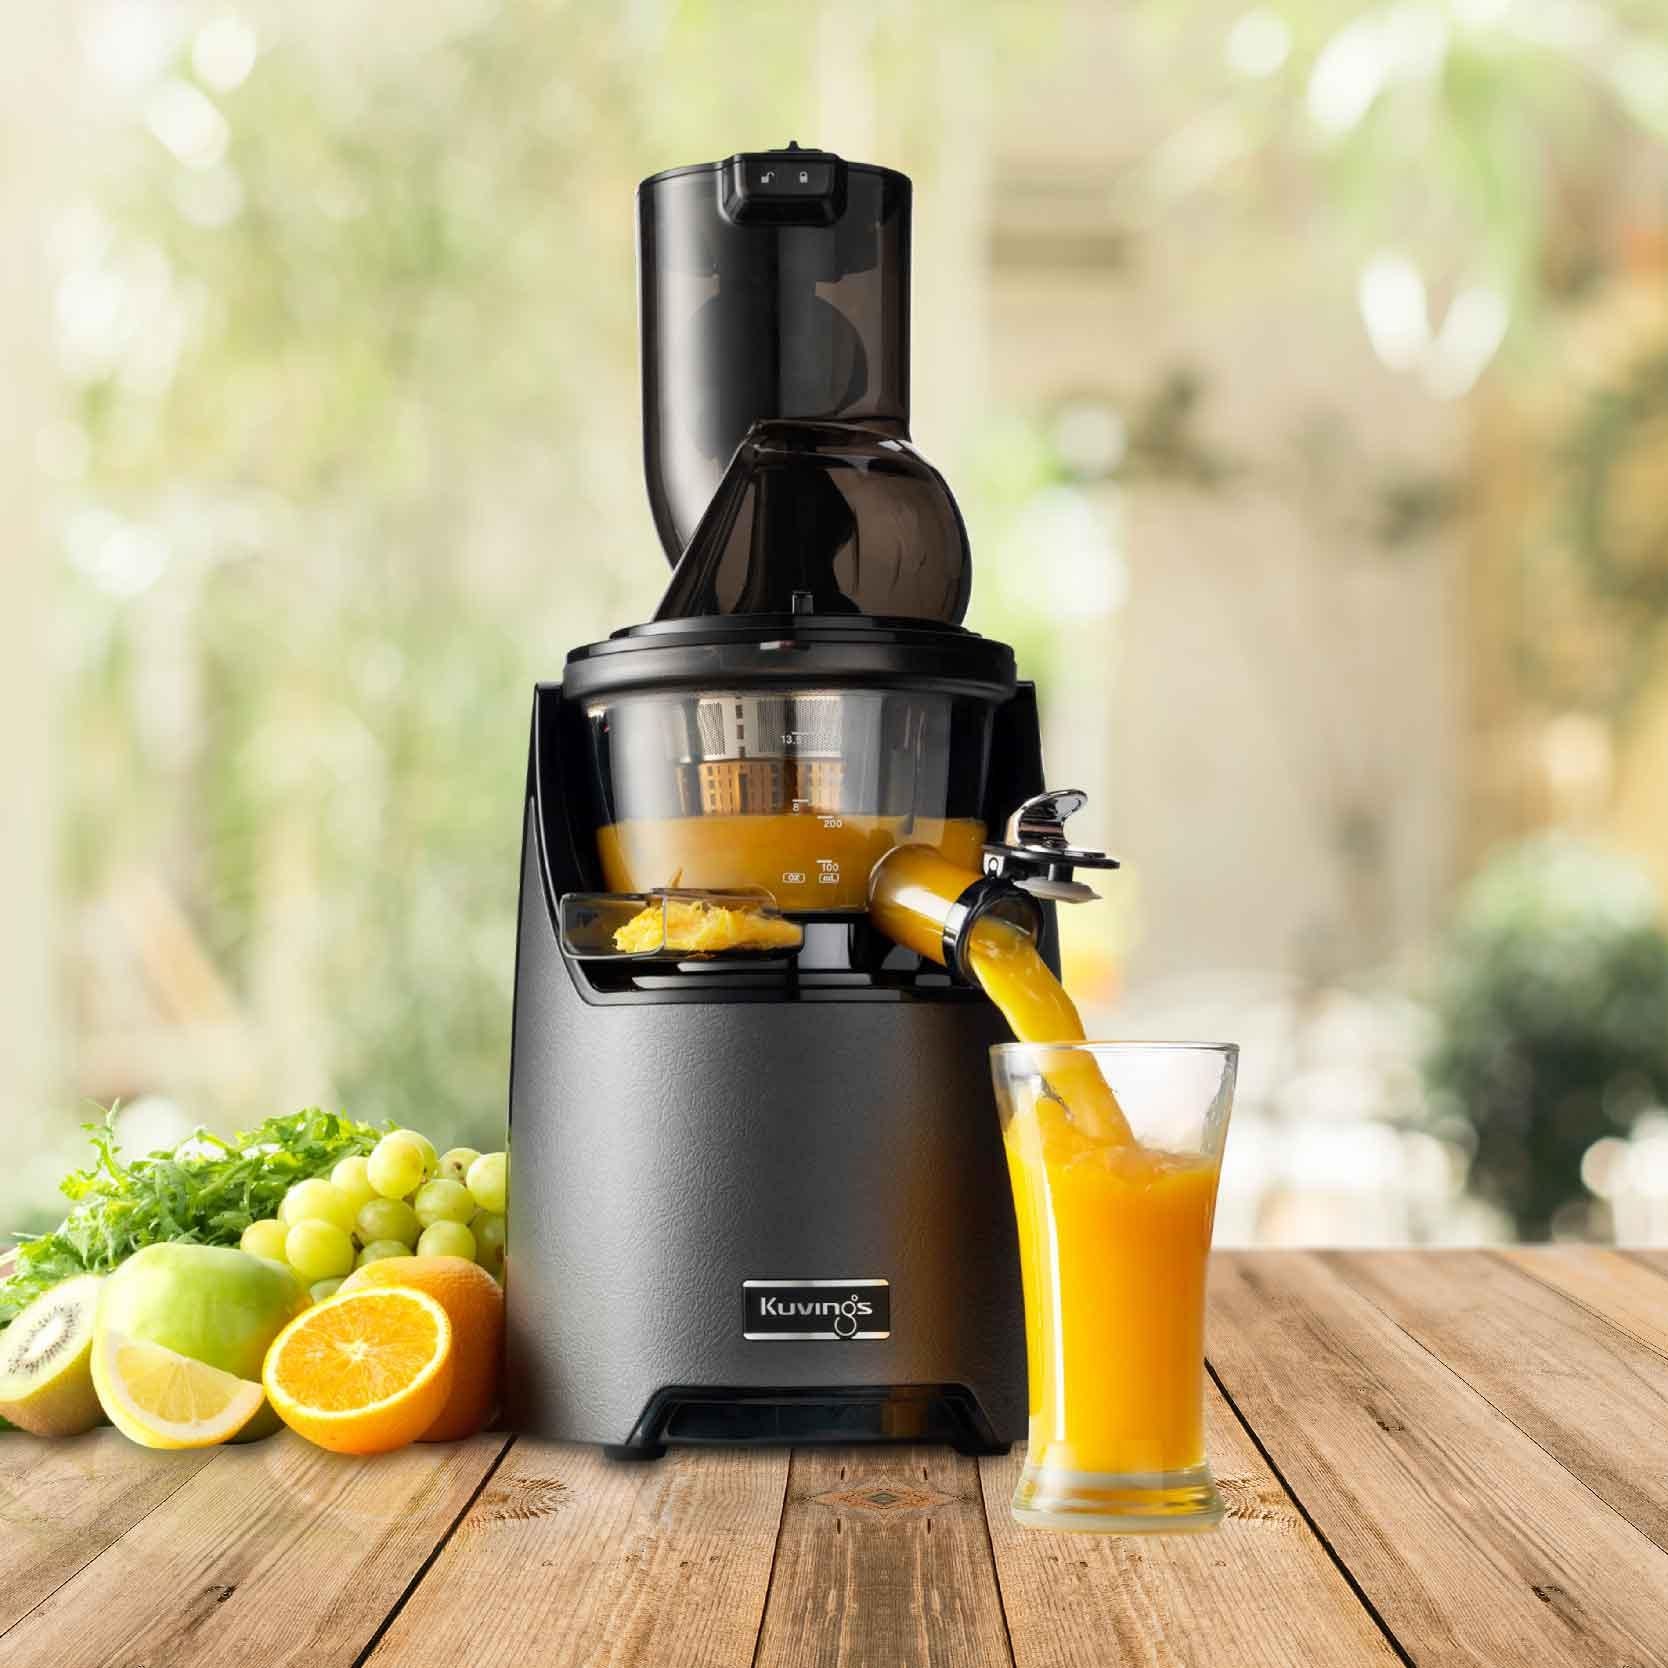 Juicer - Kuvings.my